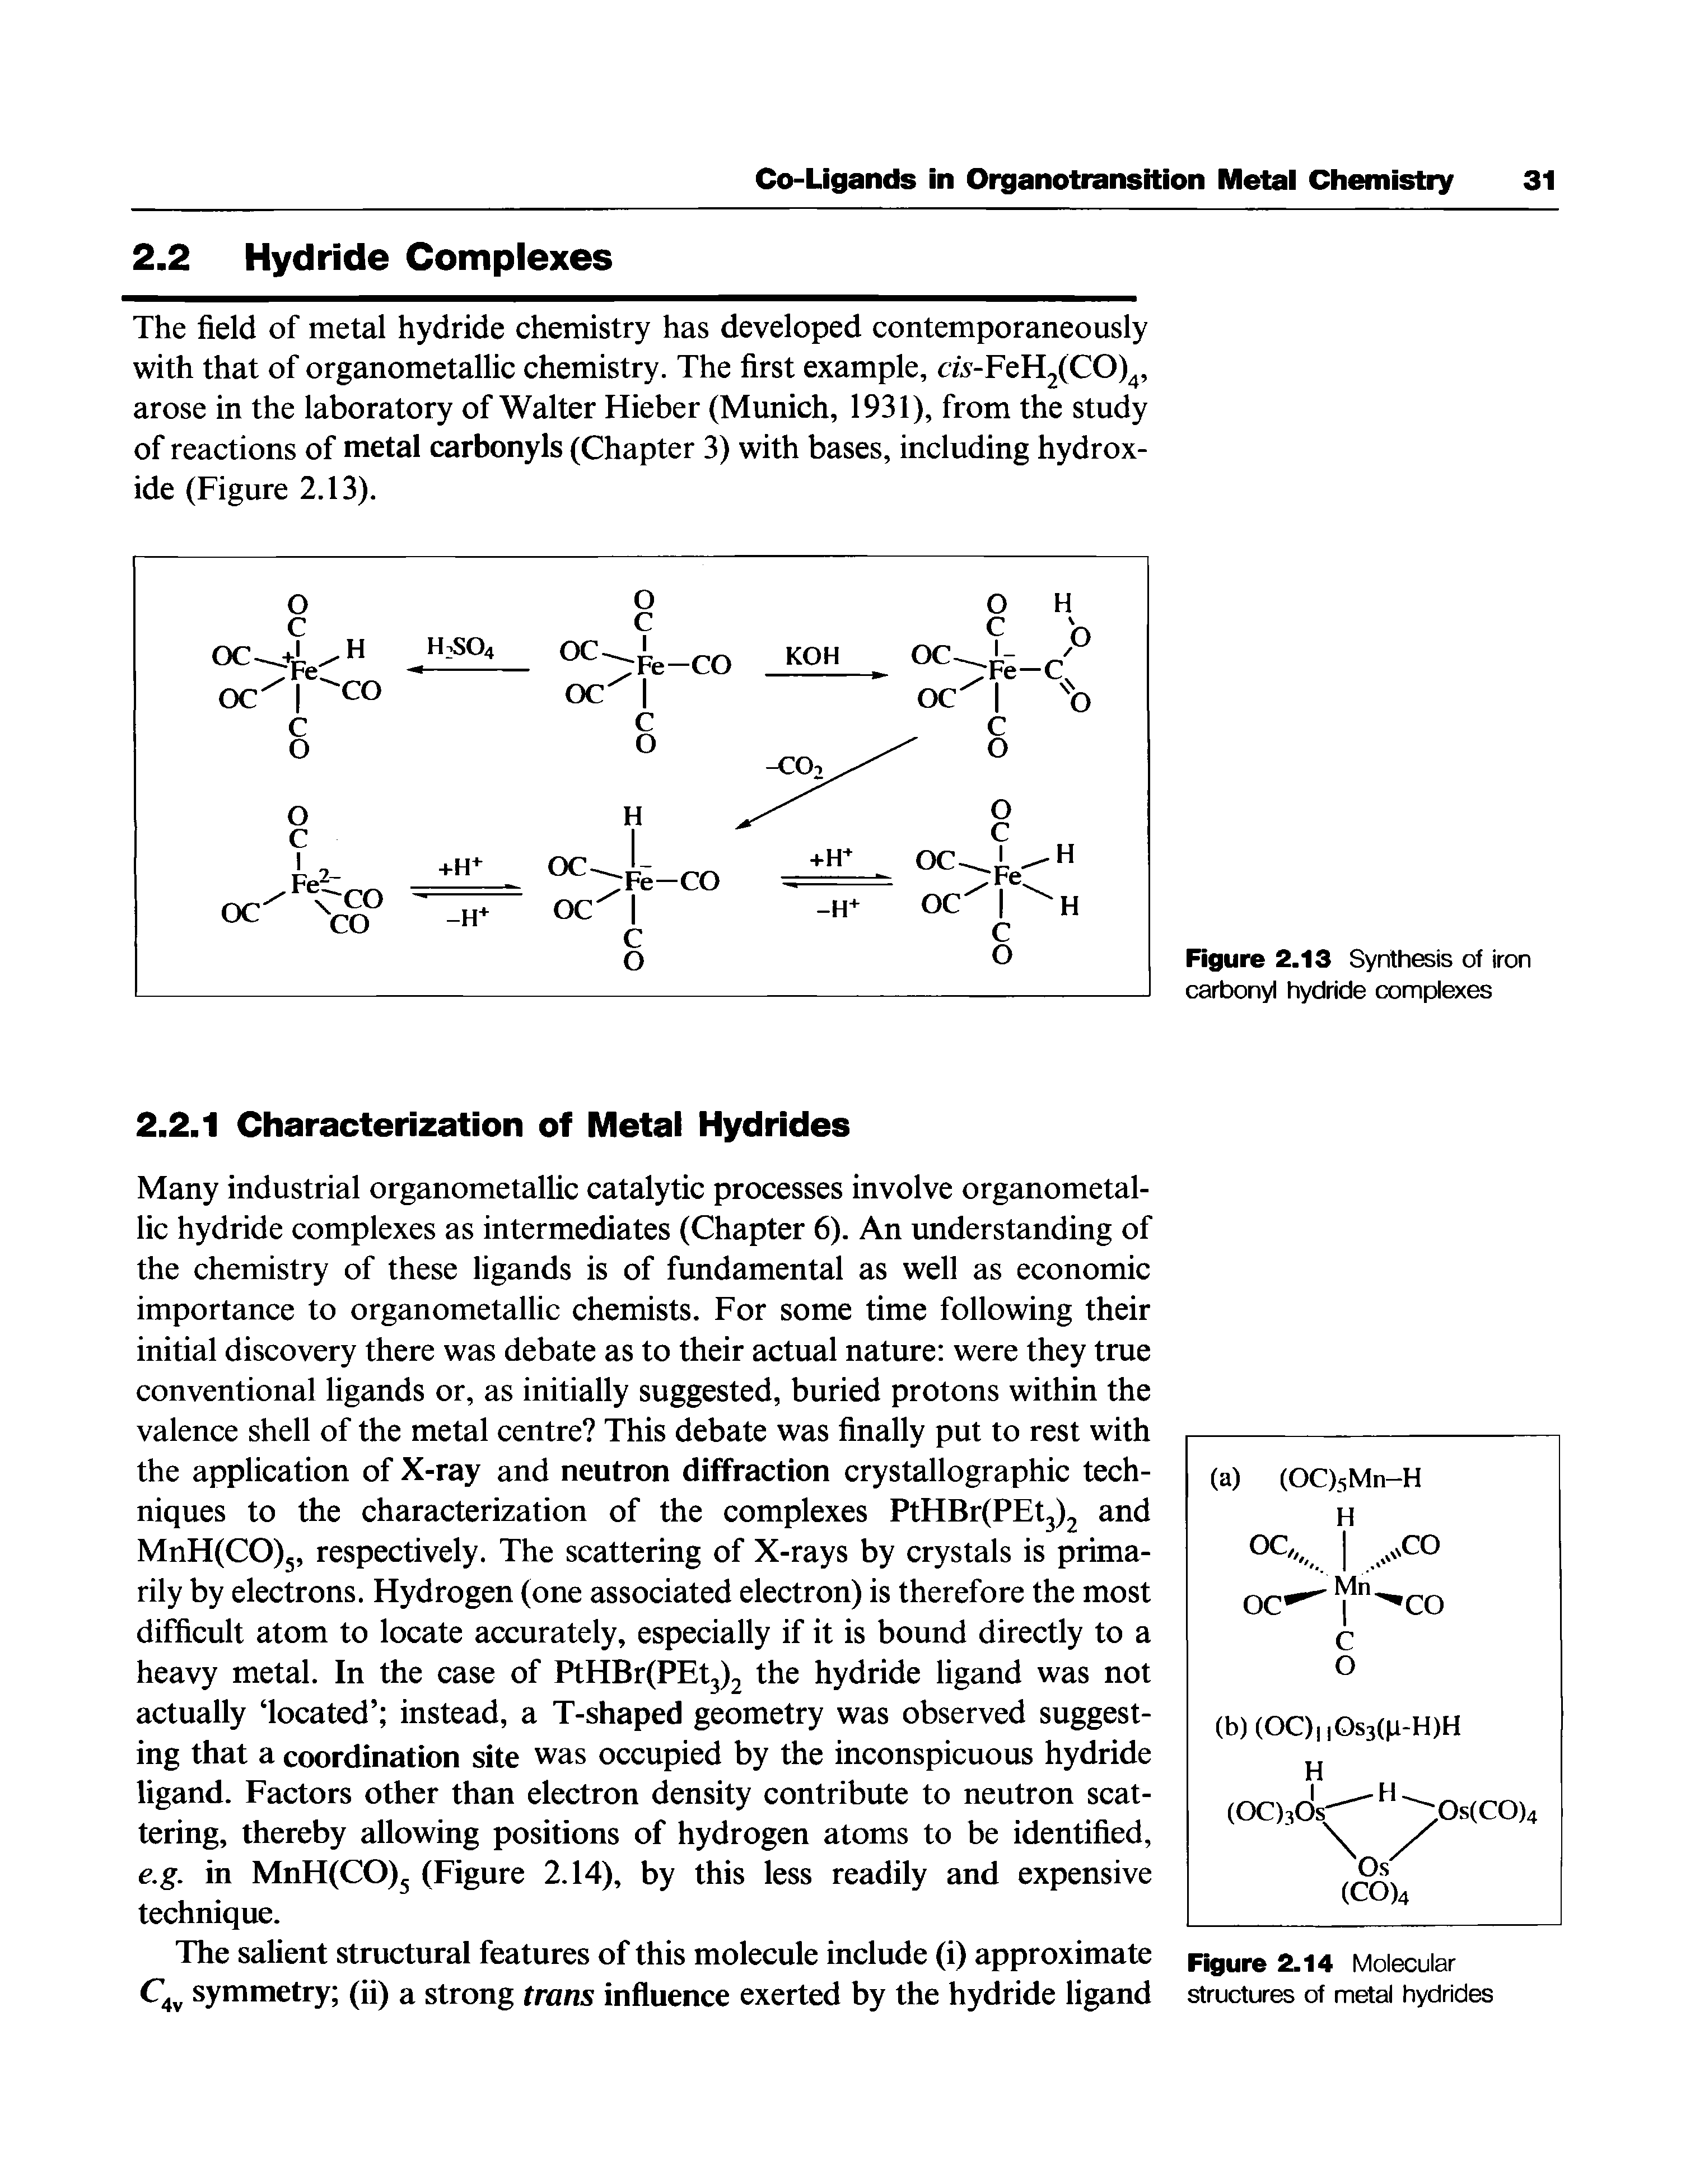 Figure 2.13 Synthesis of iron carbonyl hydride complexes...